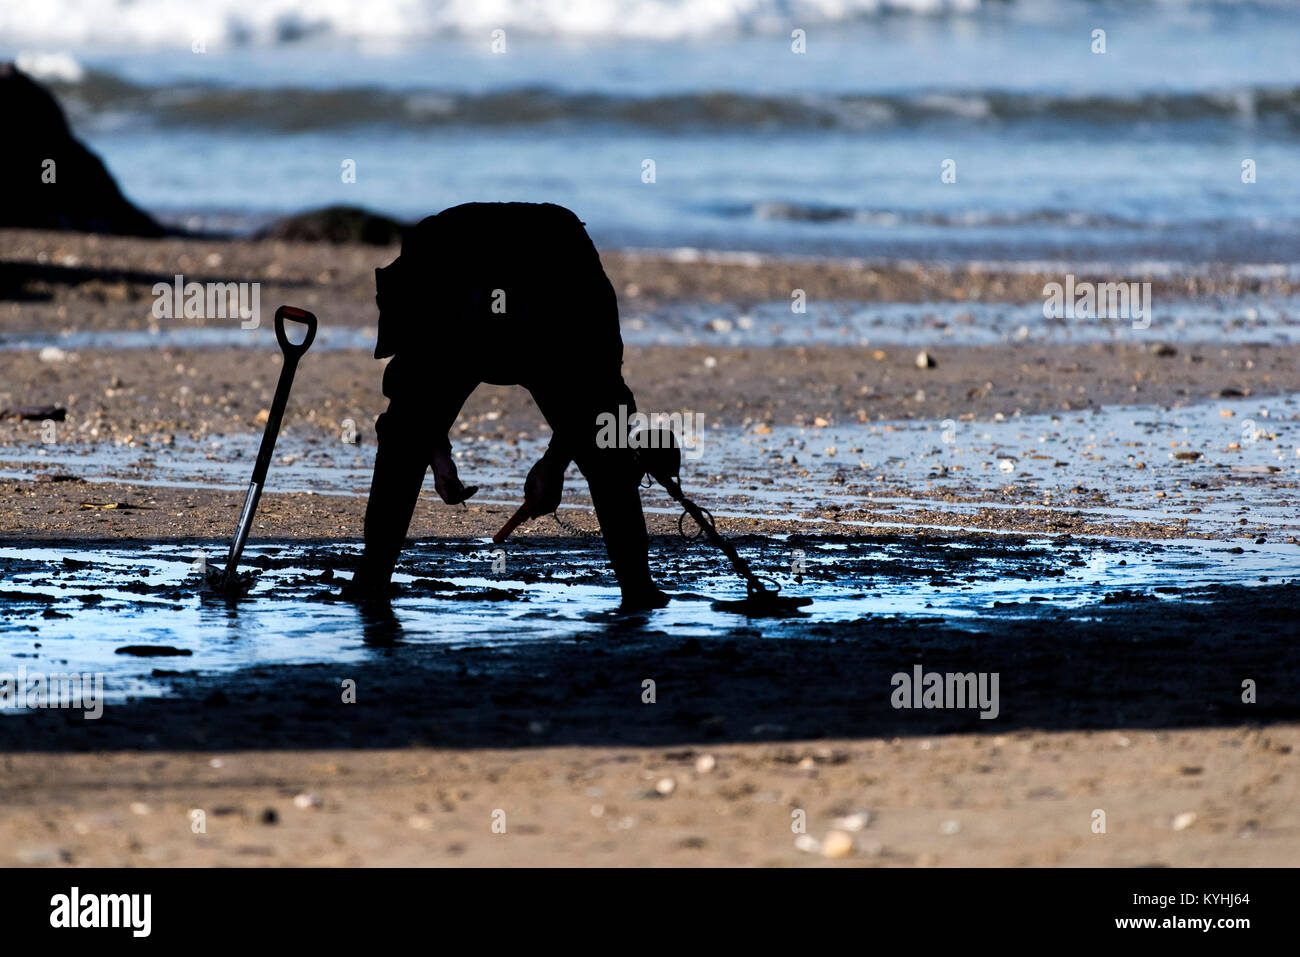 Metal detecting - the silhouette of a metal detectorist searching on Polzeath Beach on the North Cornwall Coast. Stock Photo